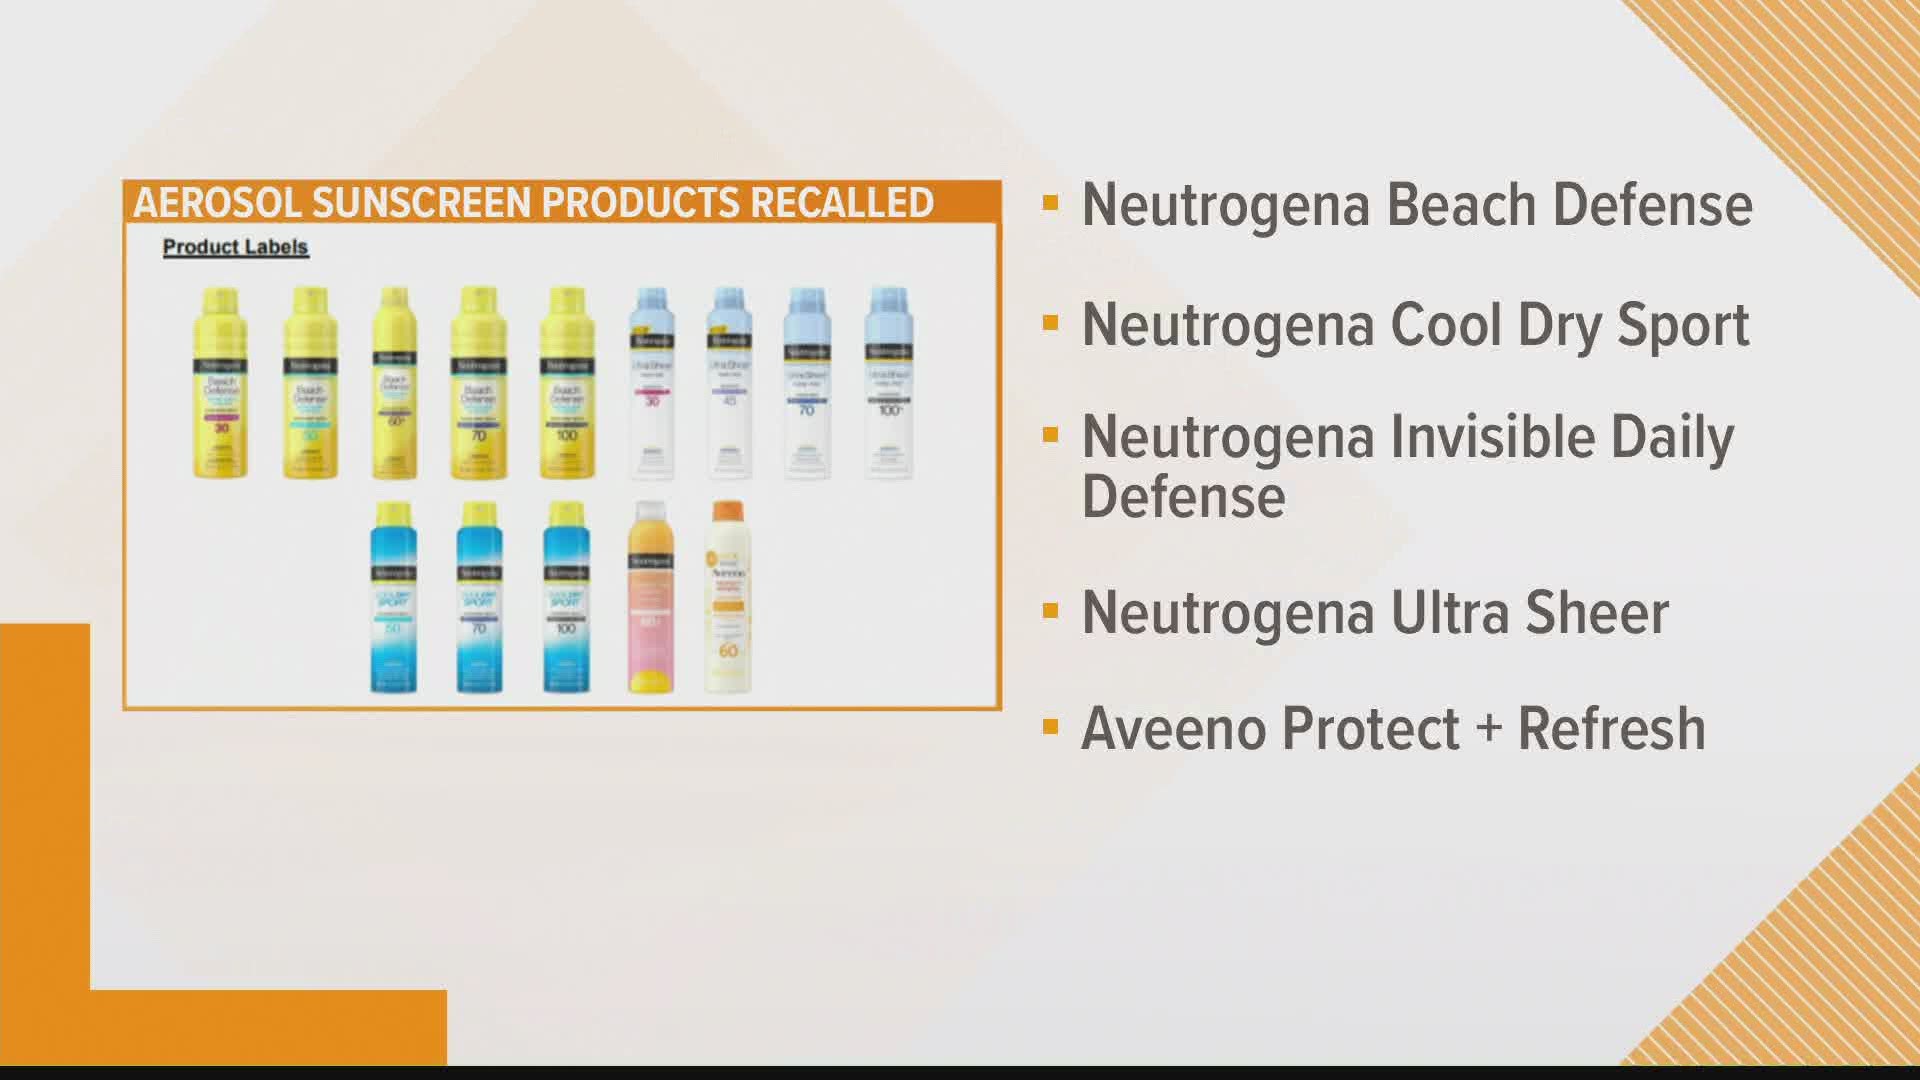 Neutrogena and Aveeno sunscreens are being recalled due to a cancer causing ingredient